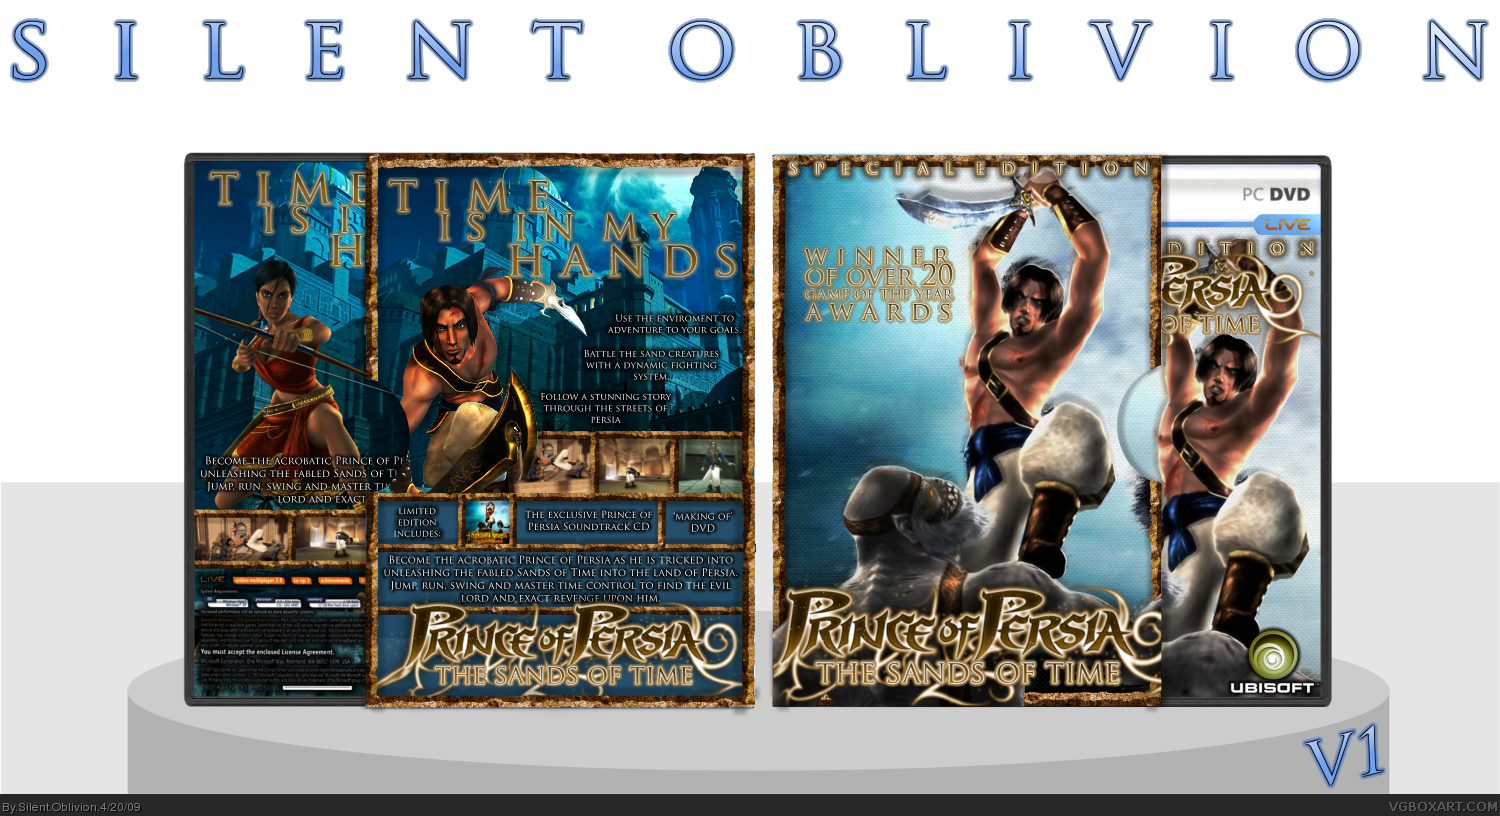 Prince Of Persia: The Sands Of Time box cover